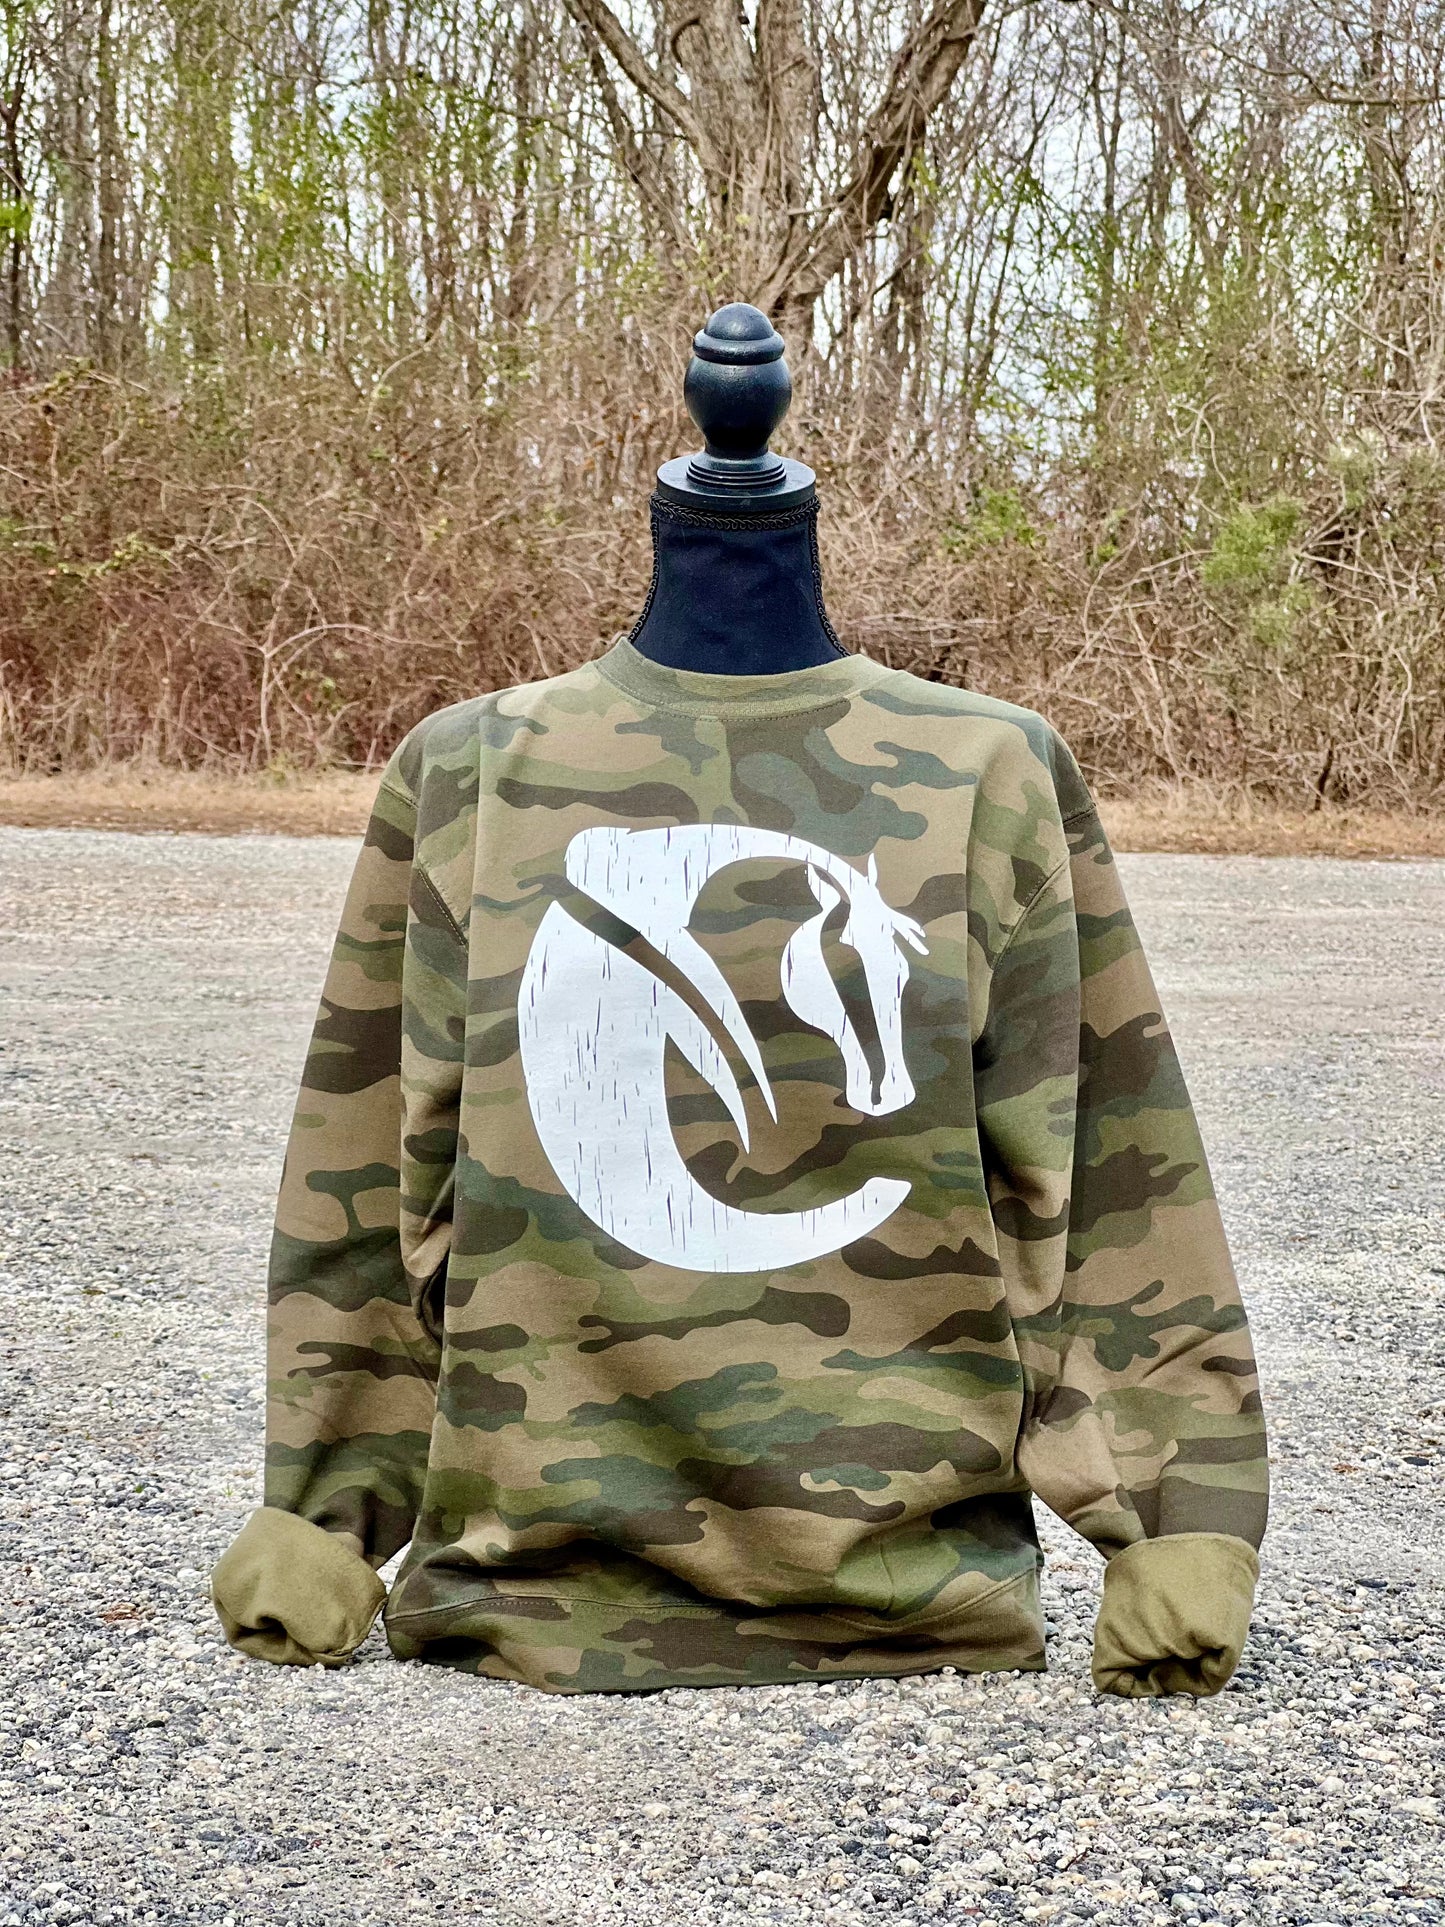 C for Core or Camo